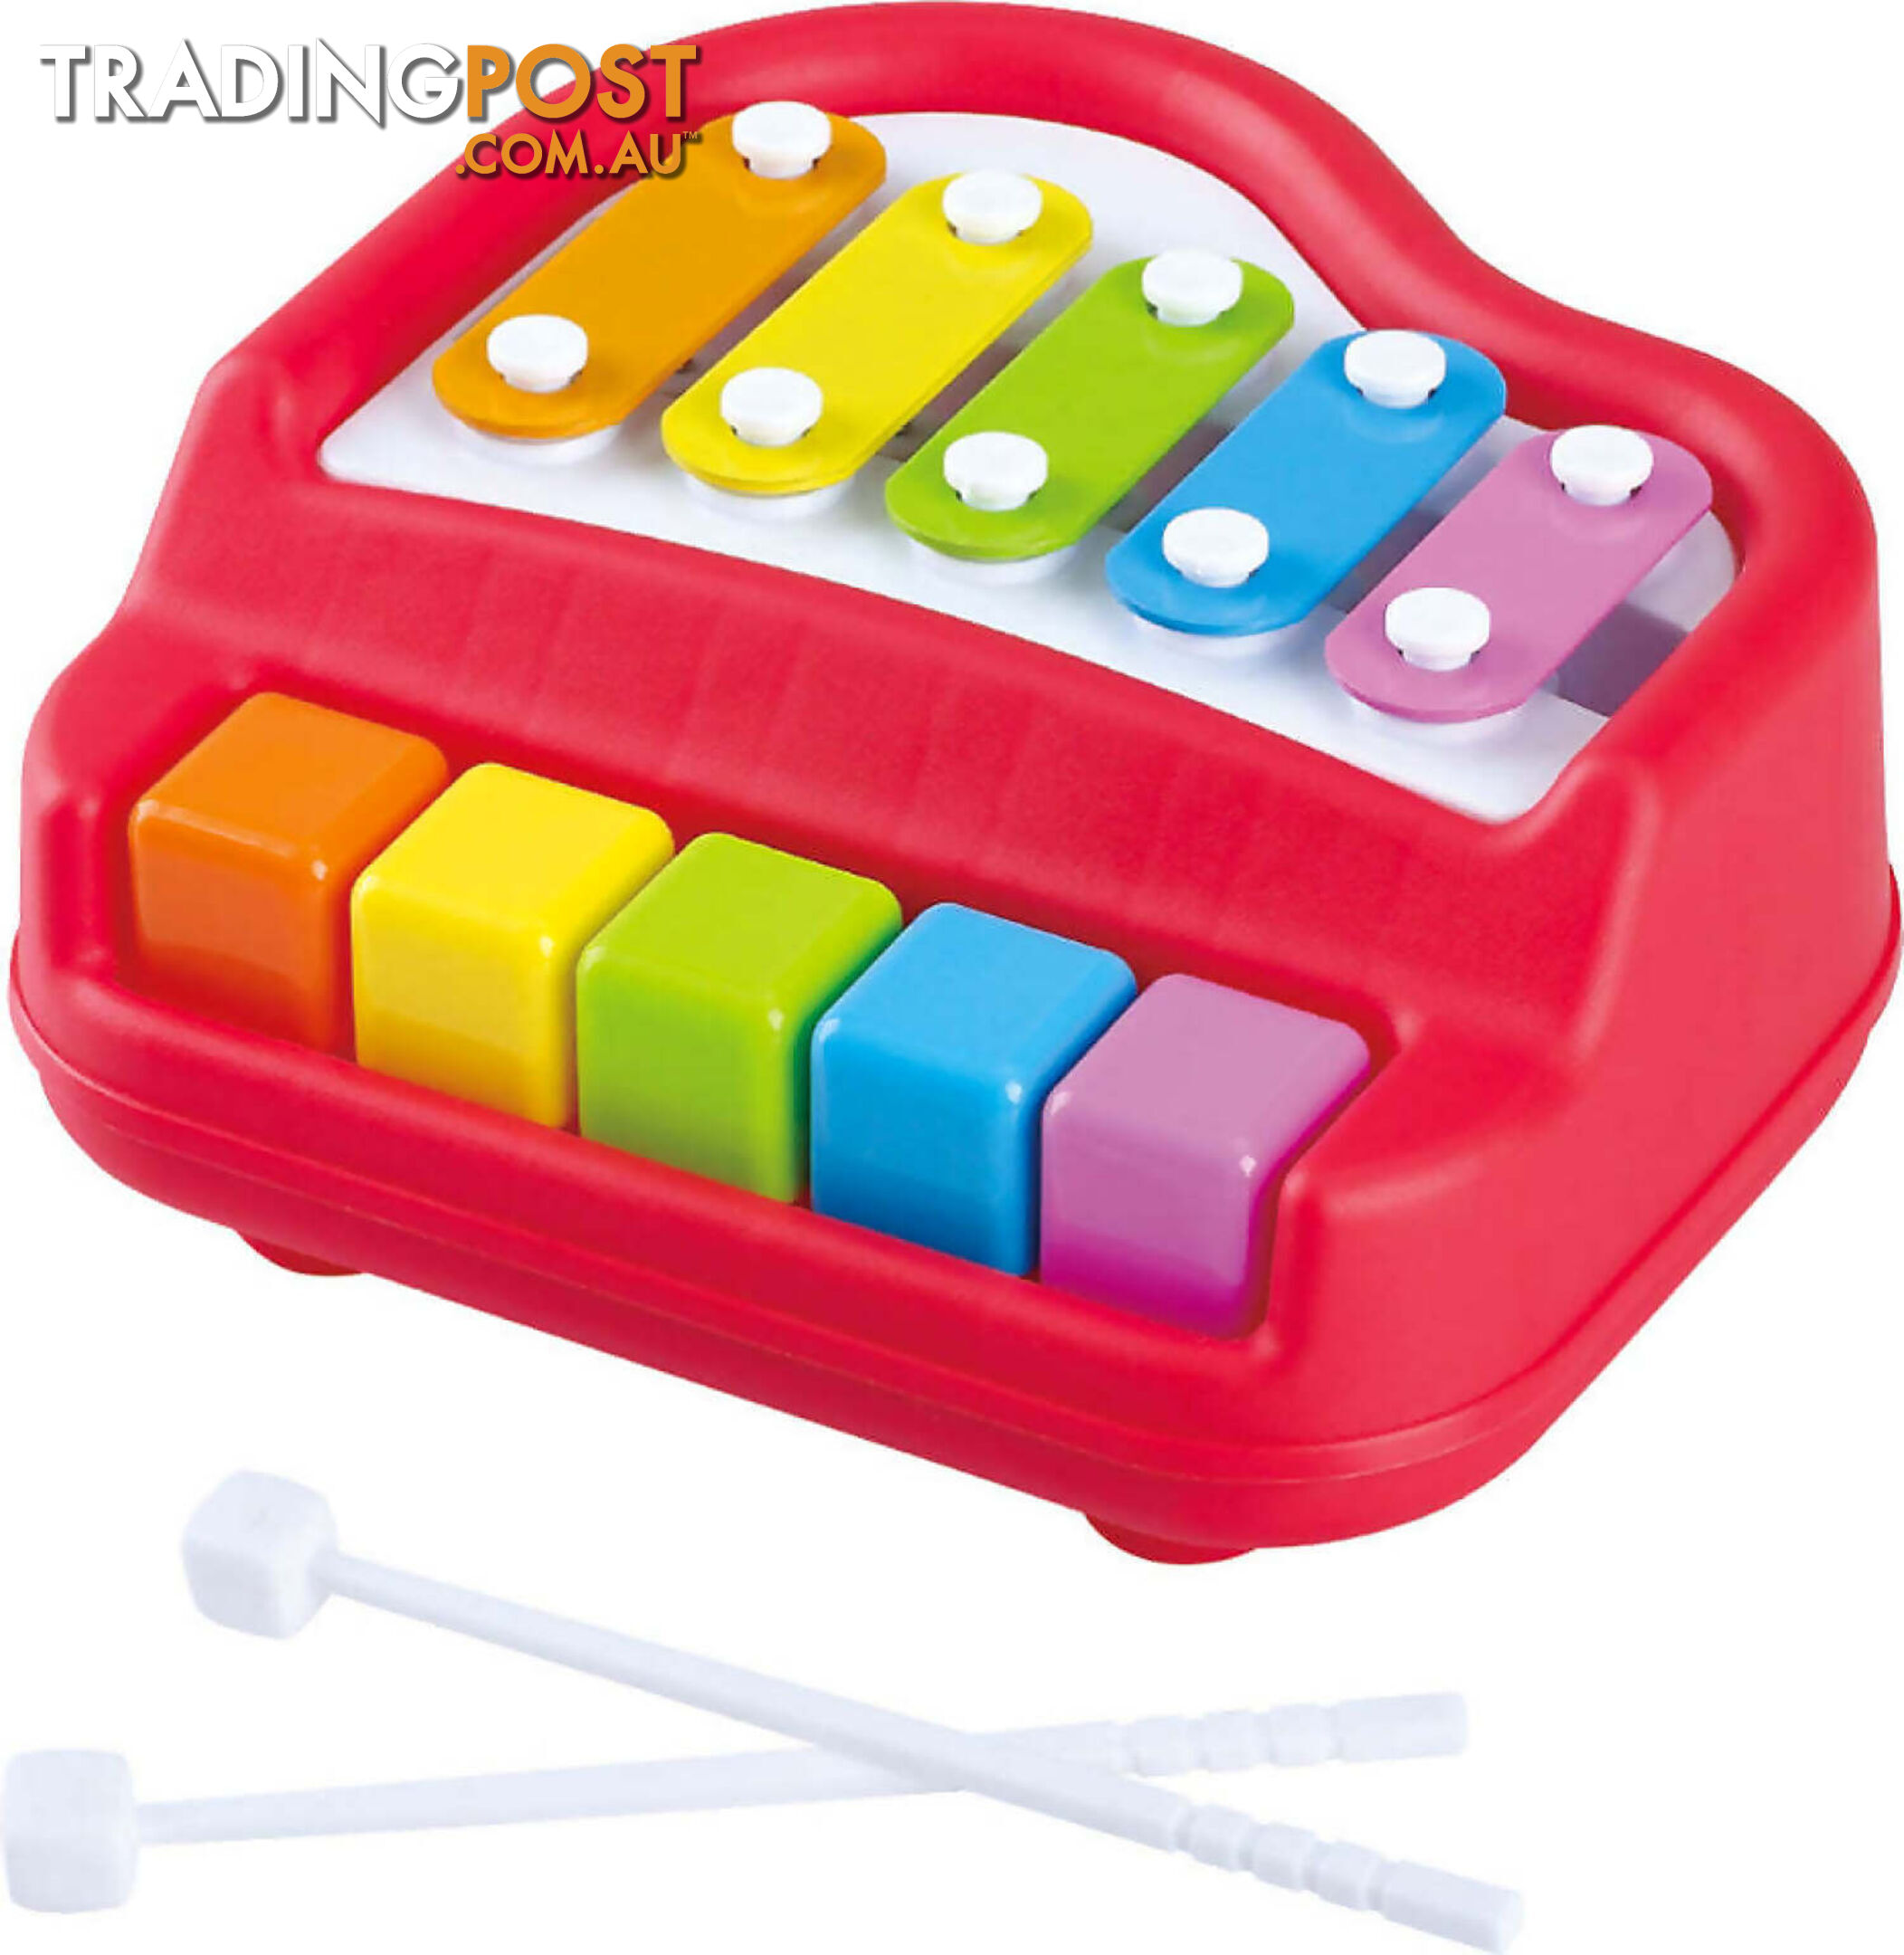 Playgo Toys Ent. Ltd. - 2-in-1 Piano & Xylophone - Art65983 - 4892401133731